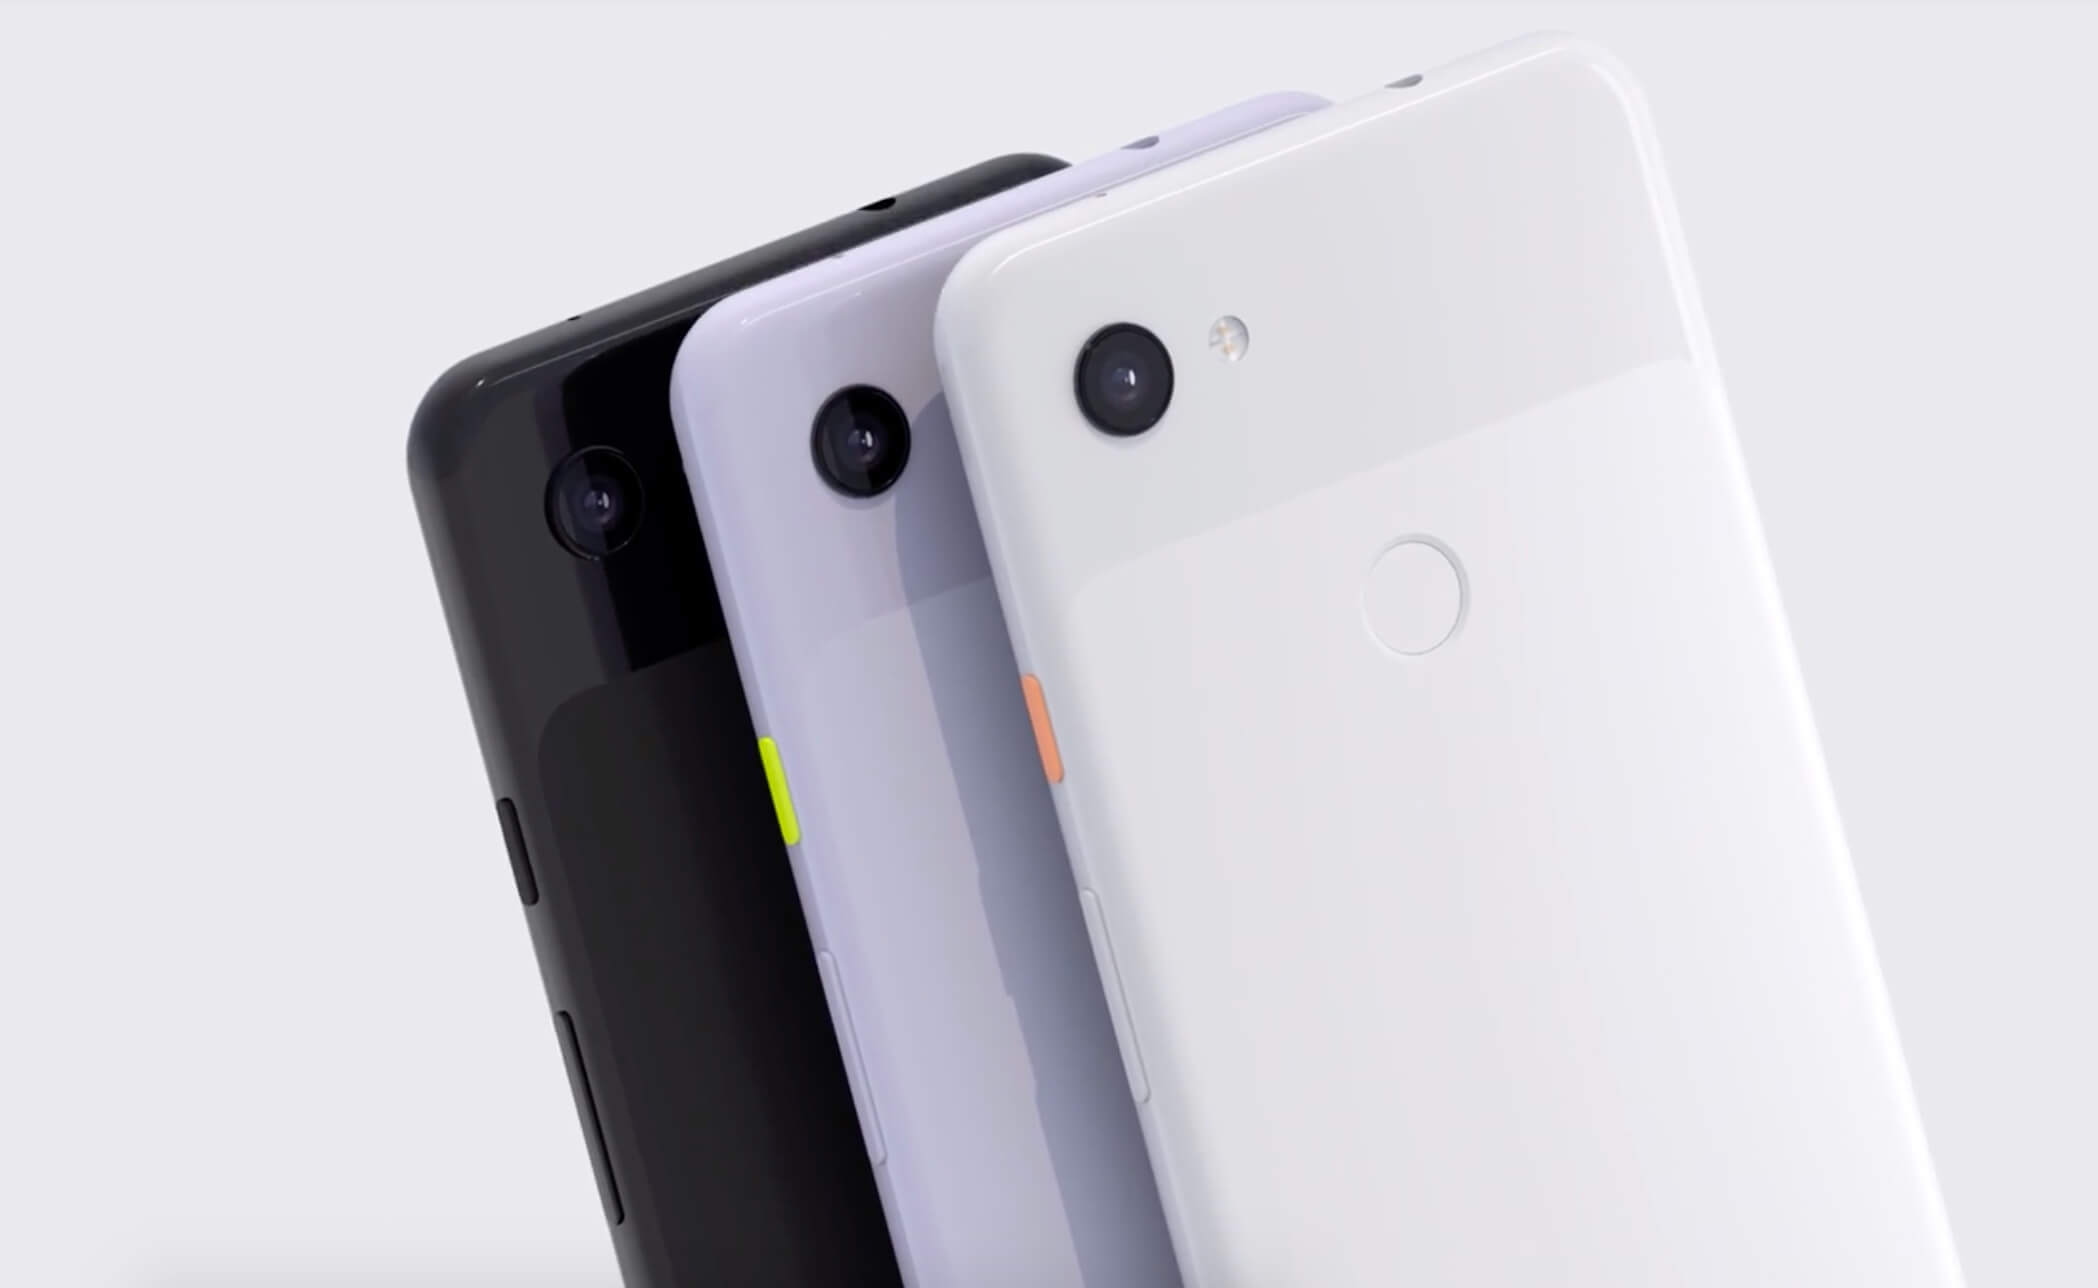 Some users report that their Pixel 3a and 3a XL phones are experiencing random shutdowns